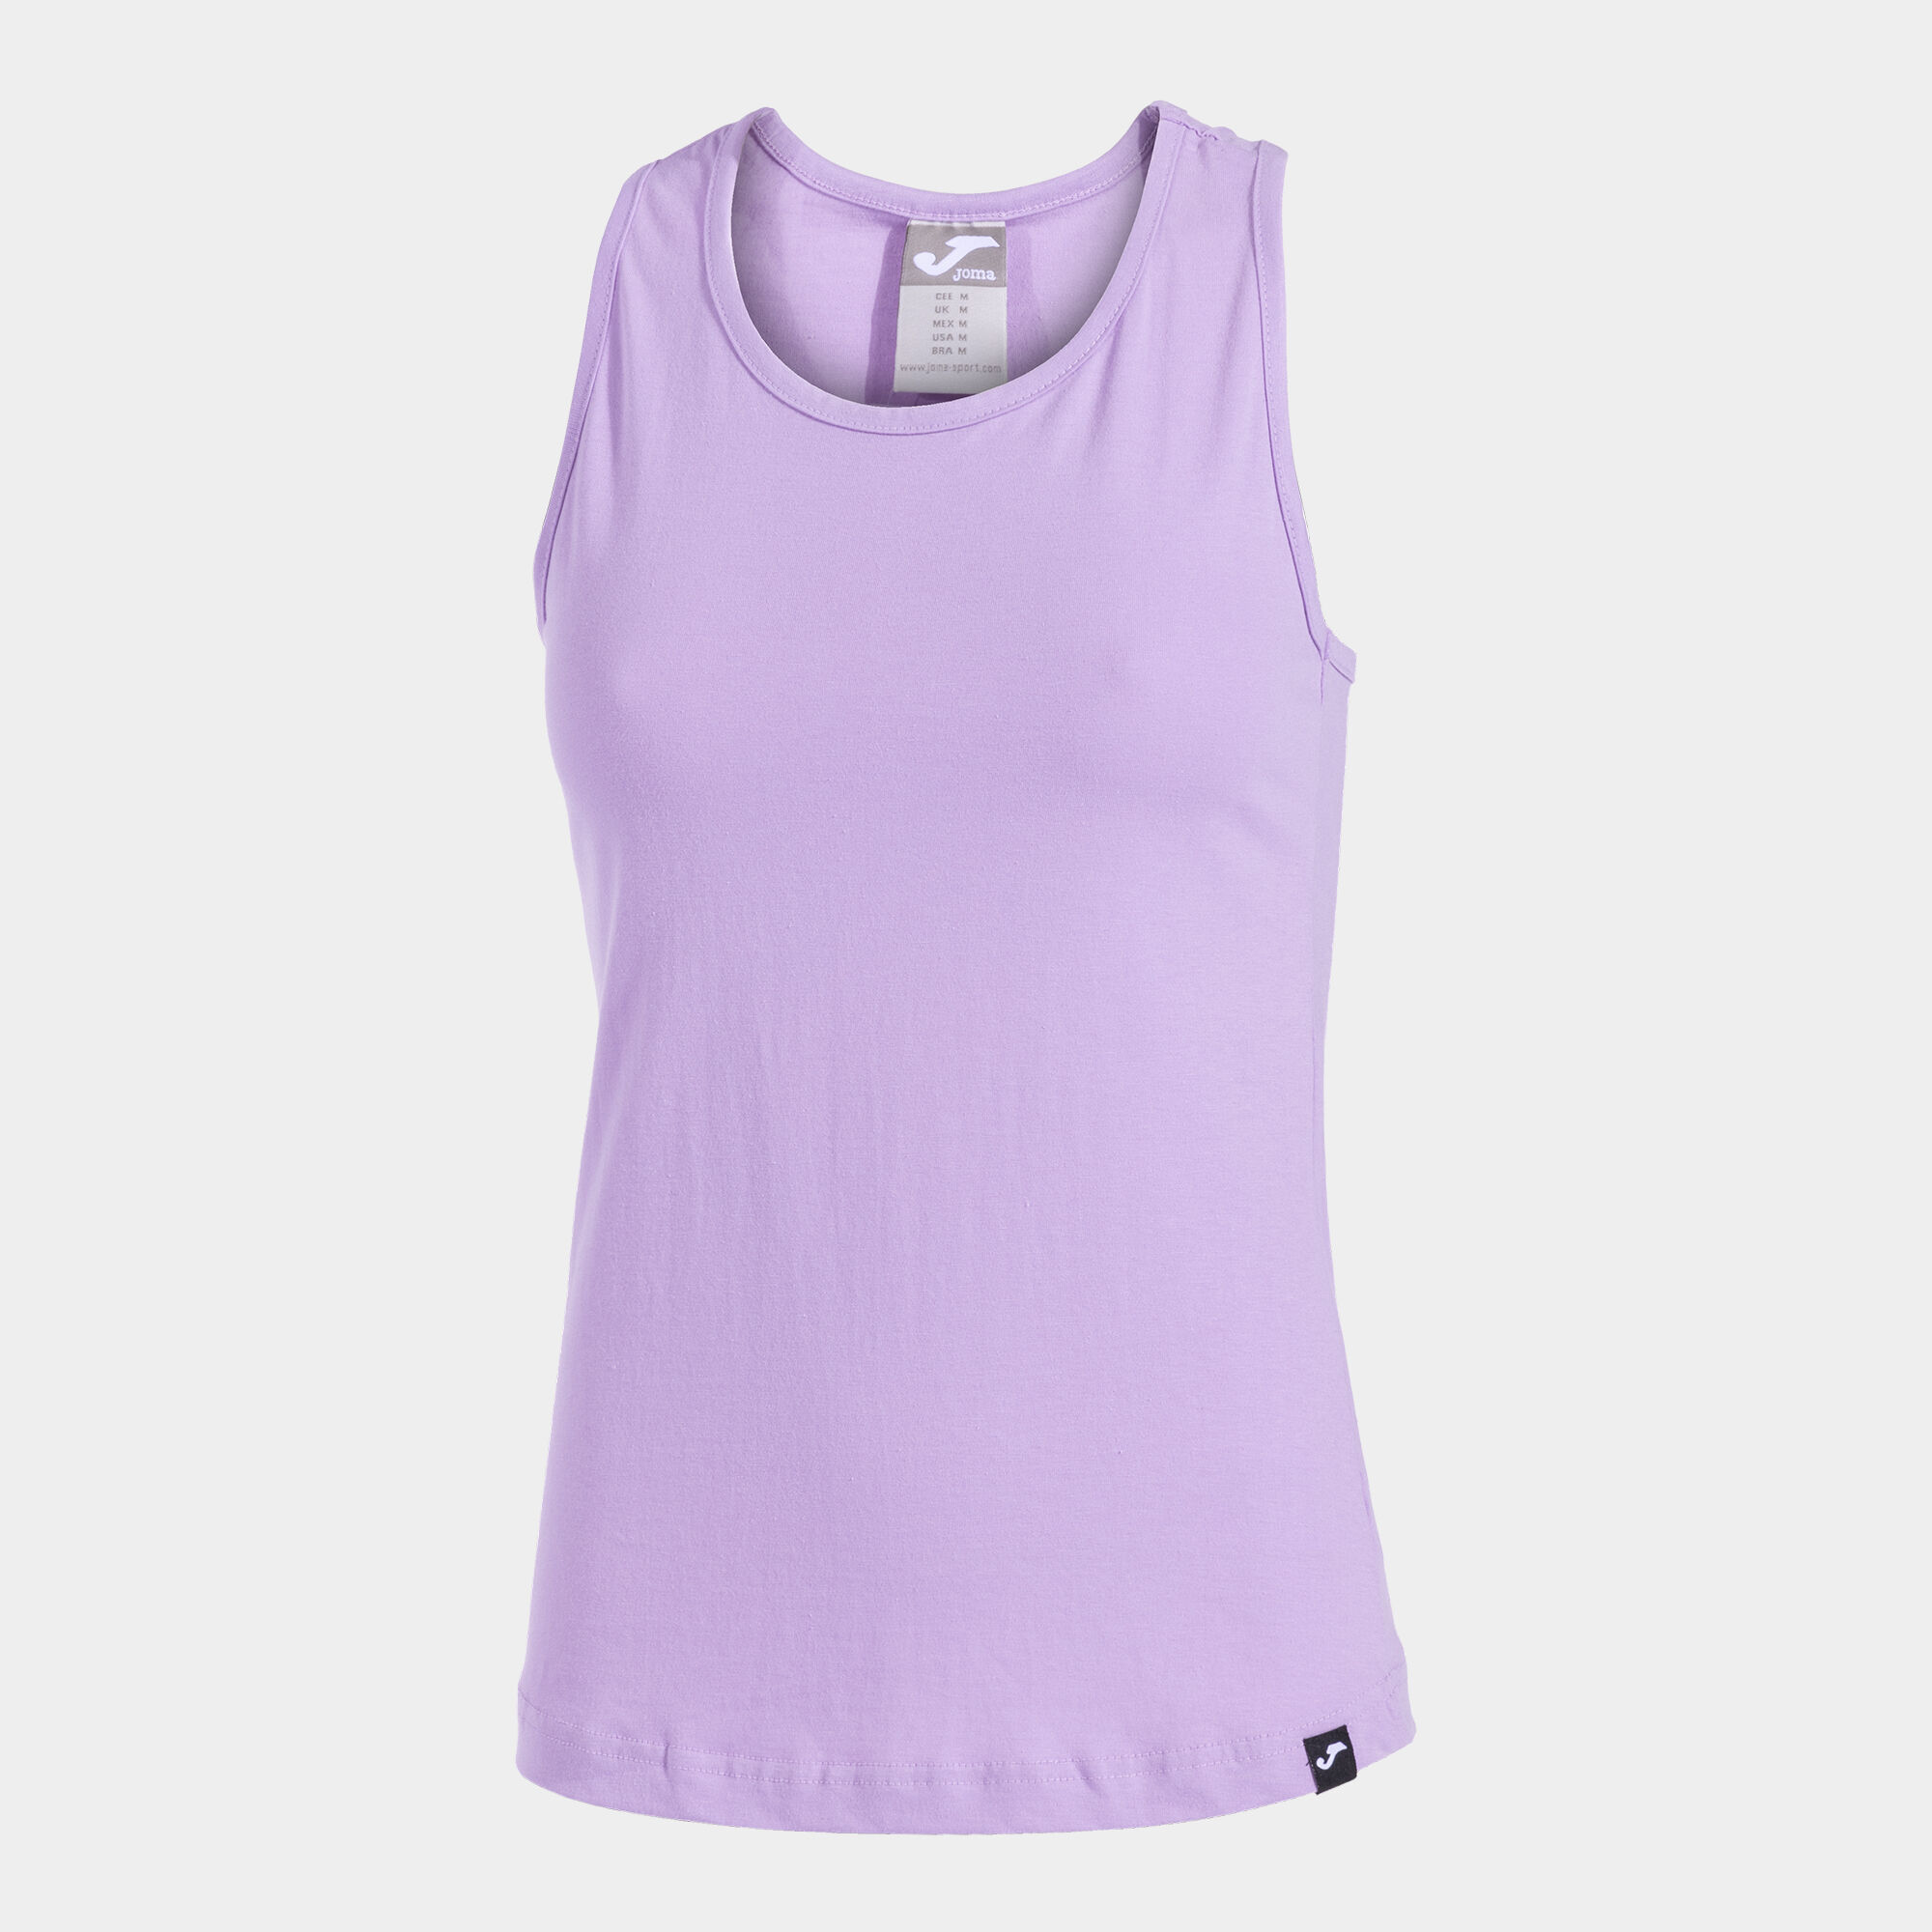 Tank Top Types  Swimming outfits, Tank tops, Tank